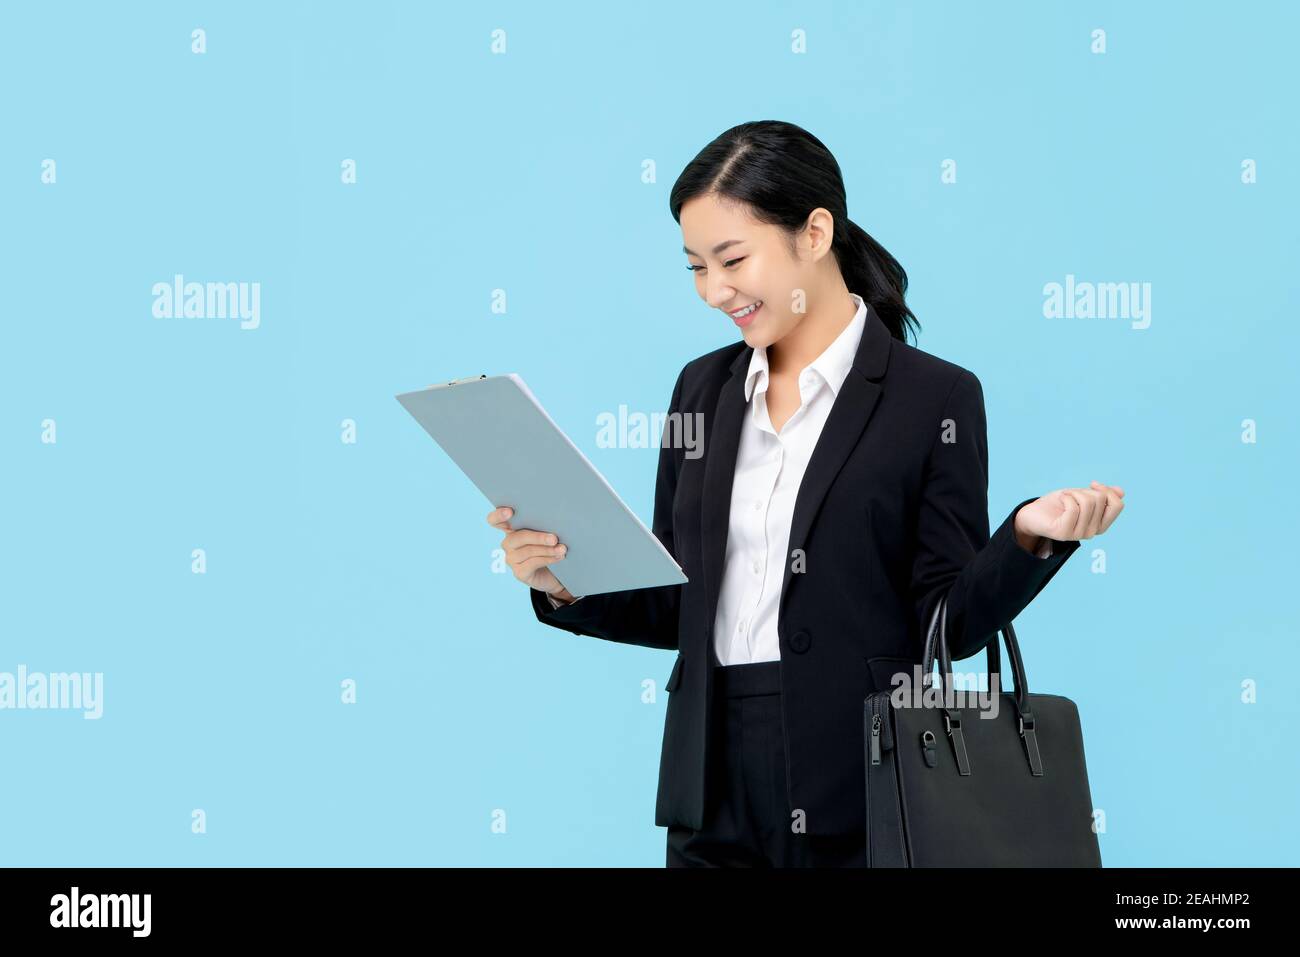 Professional Asian businesswoman in formal suit holding briefcase looking at clipboard isolated on light blue background Stock Photo